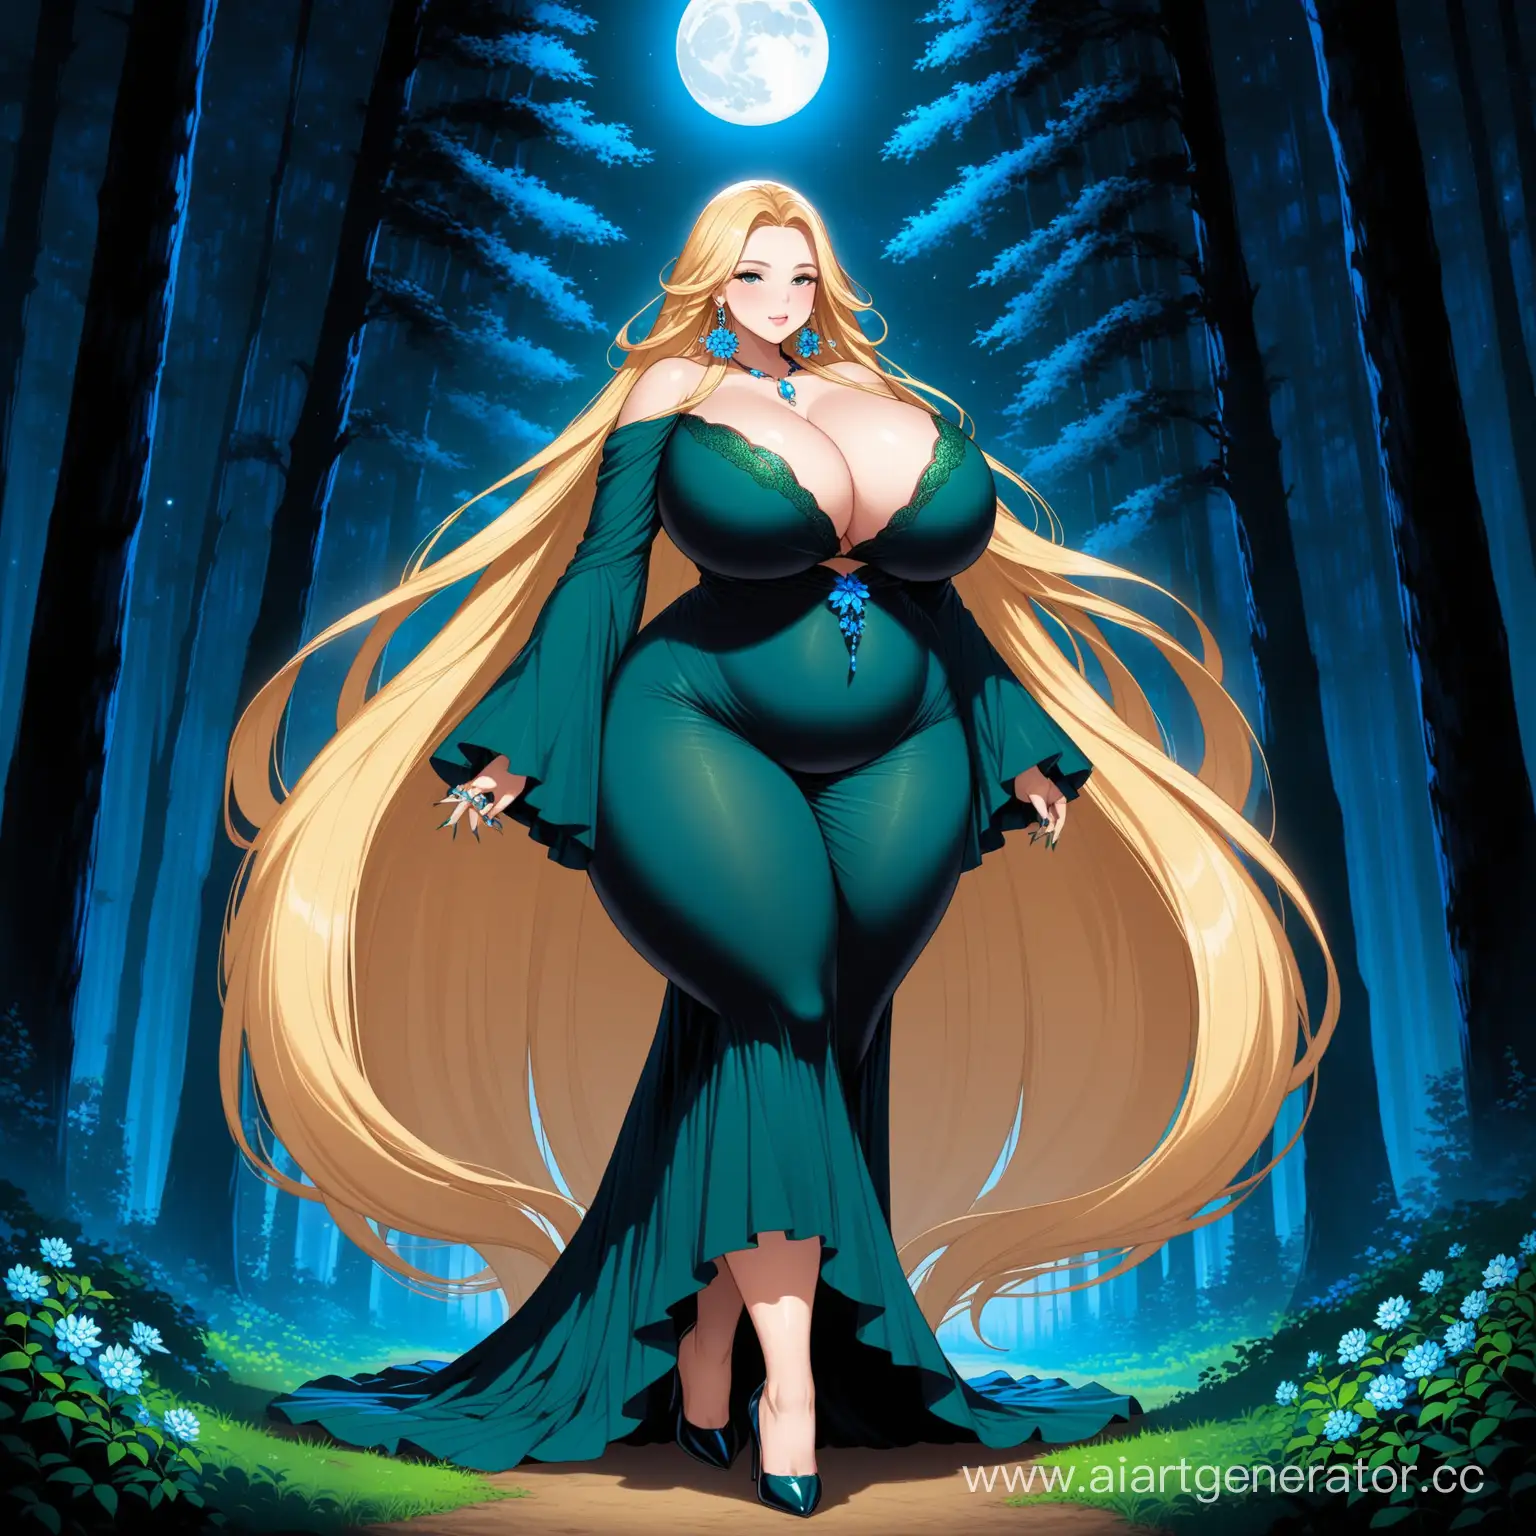 Stylish-Woman-with-Natural-Elegance-in-a-Moonlit-Forest